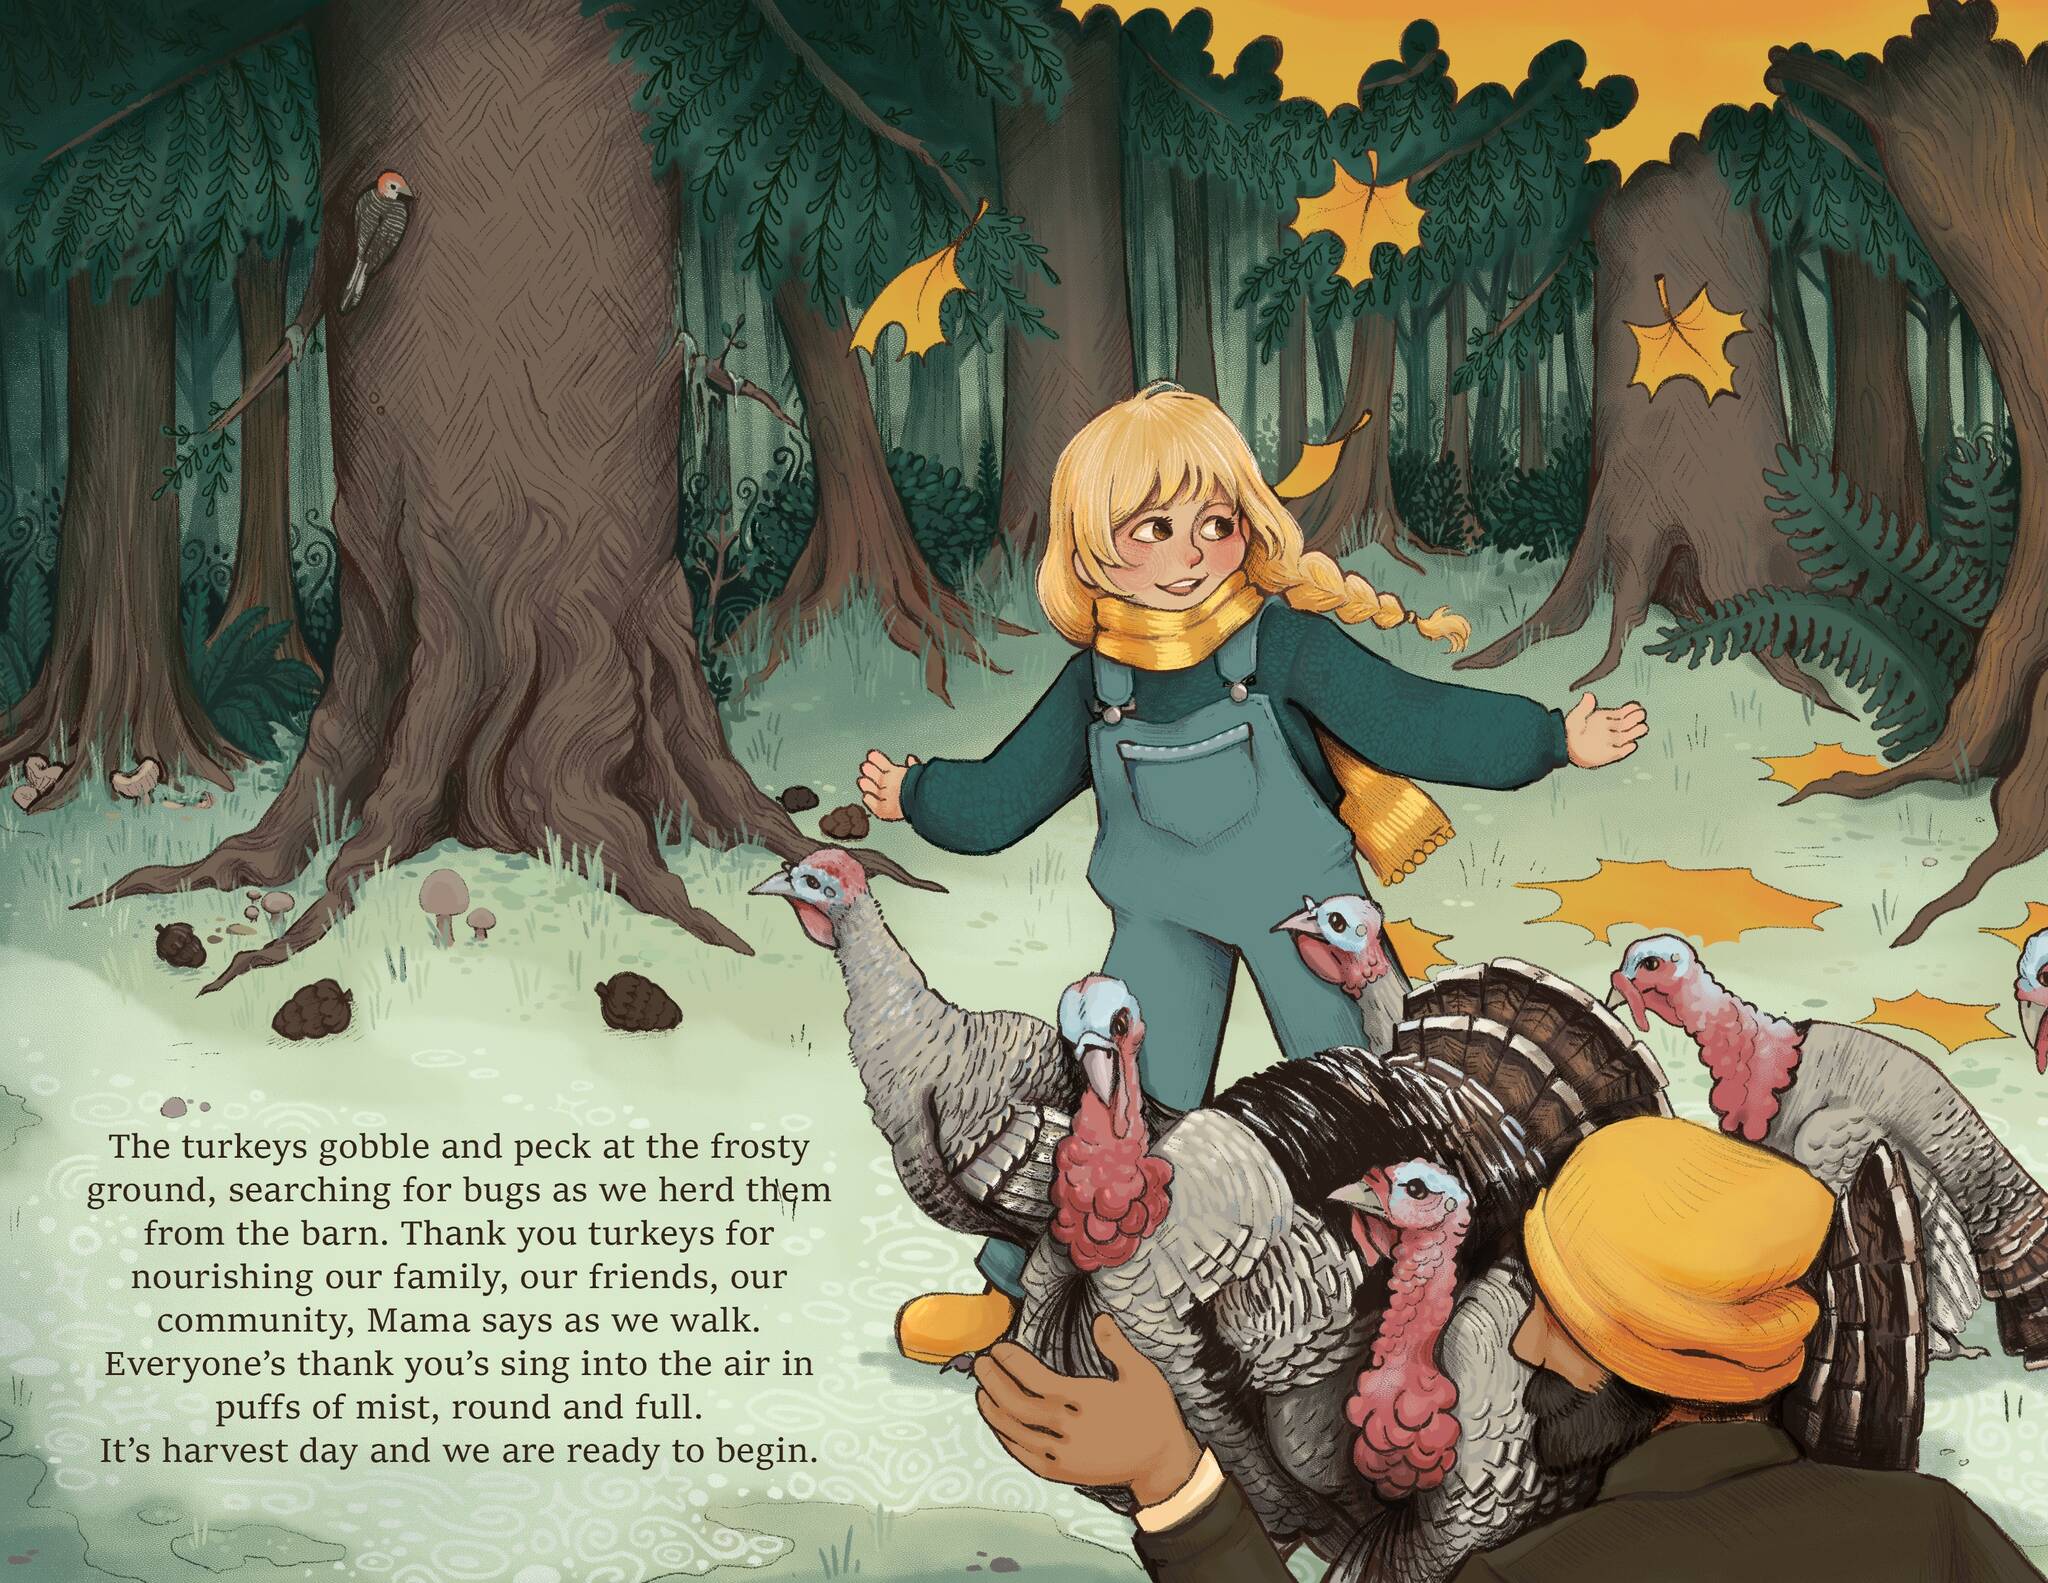 “Thankful Harvest” explores the circle of life on a farm where regenerative agricultural practices are used and animals are raised with care. (Illustration by Heather Talley)